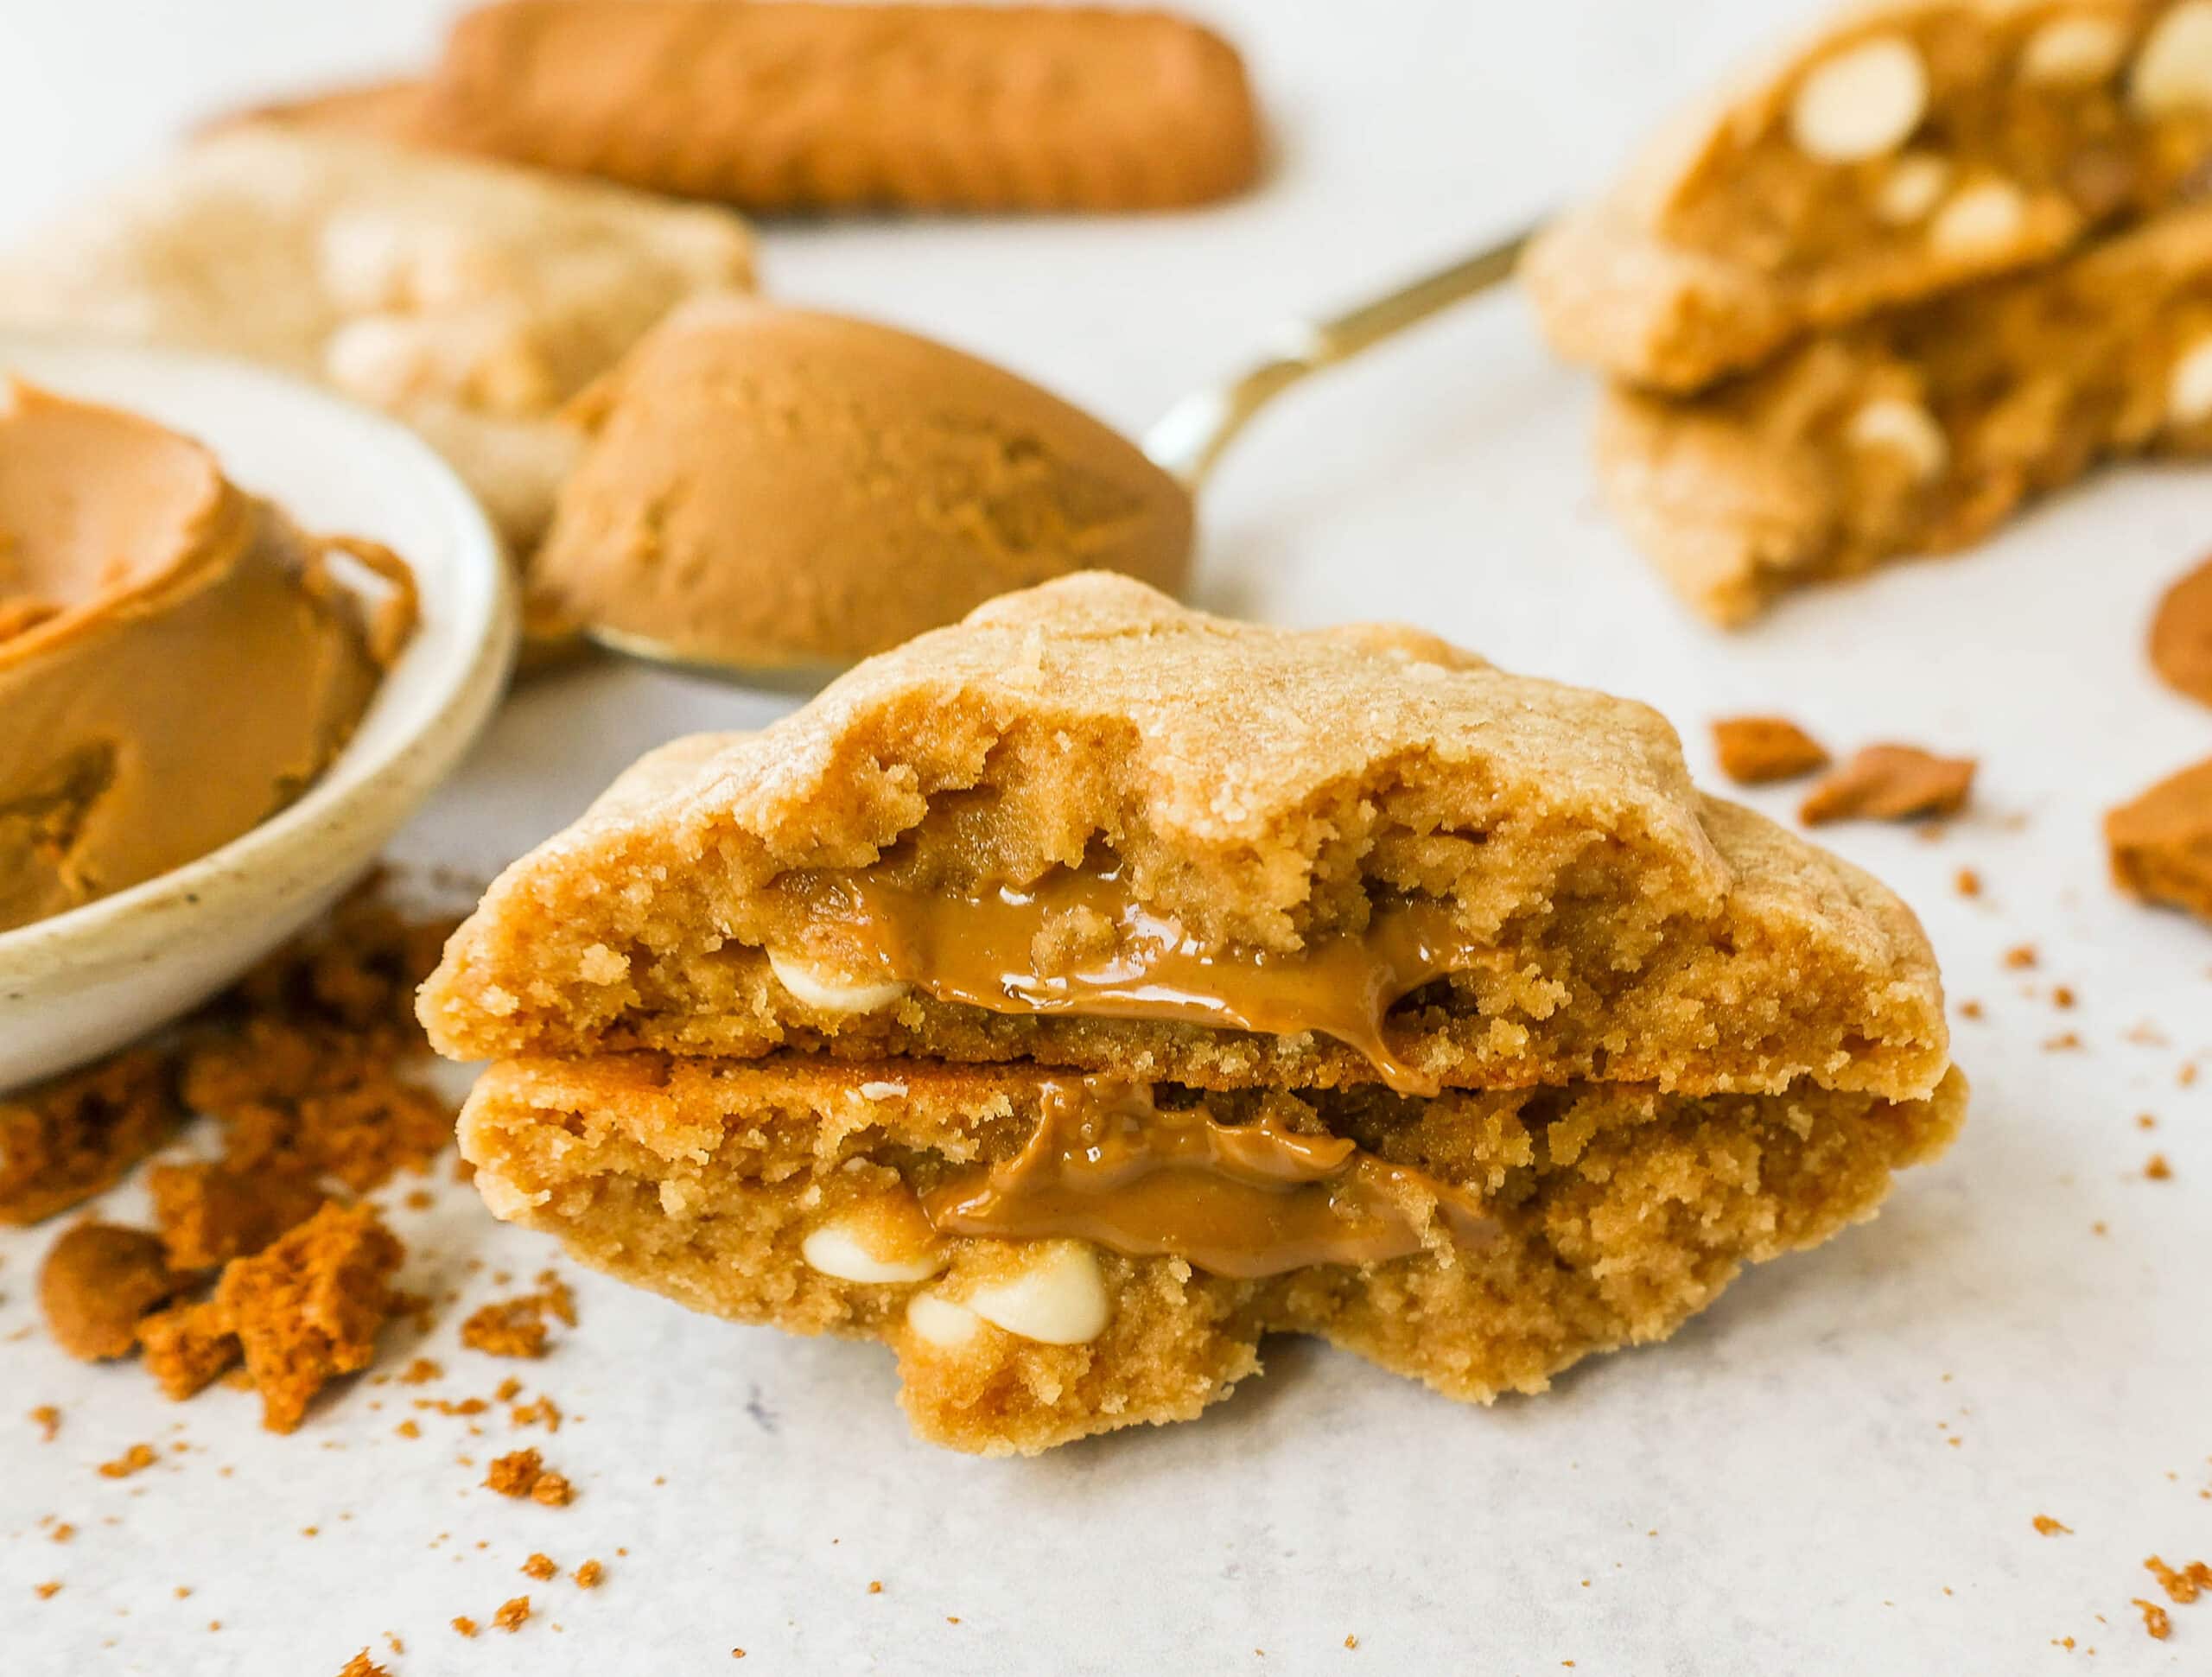 Best Speculoos Recipe - How to Make Speculoos